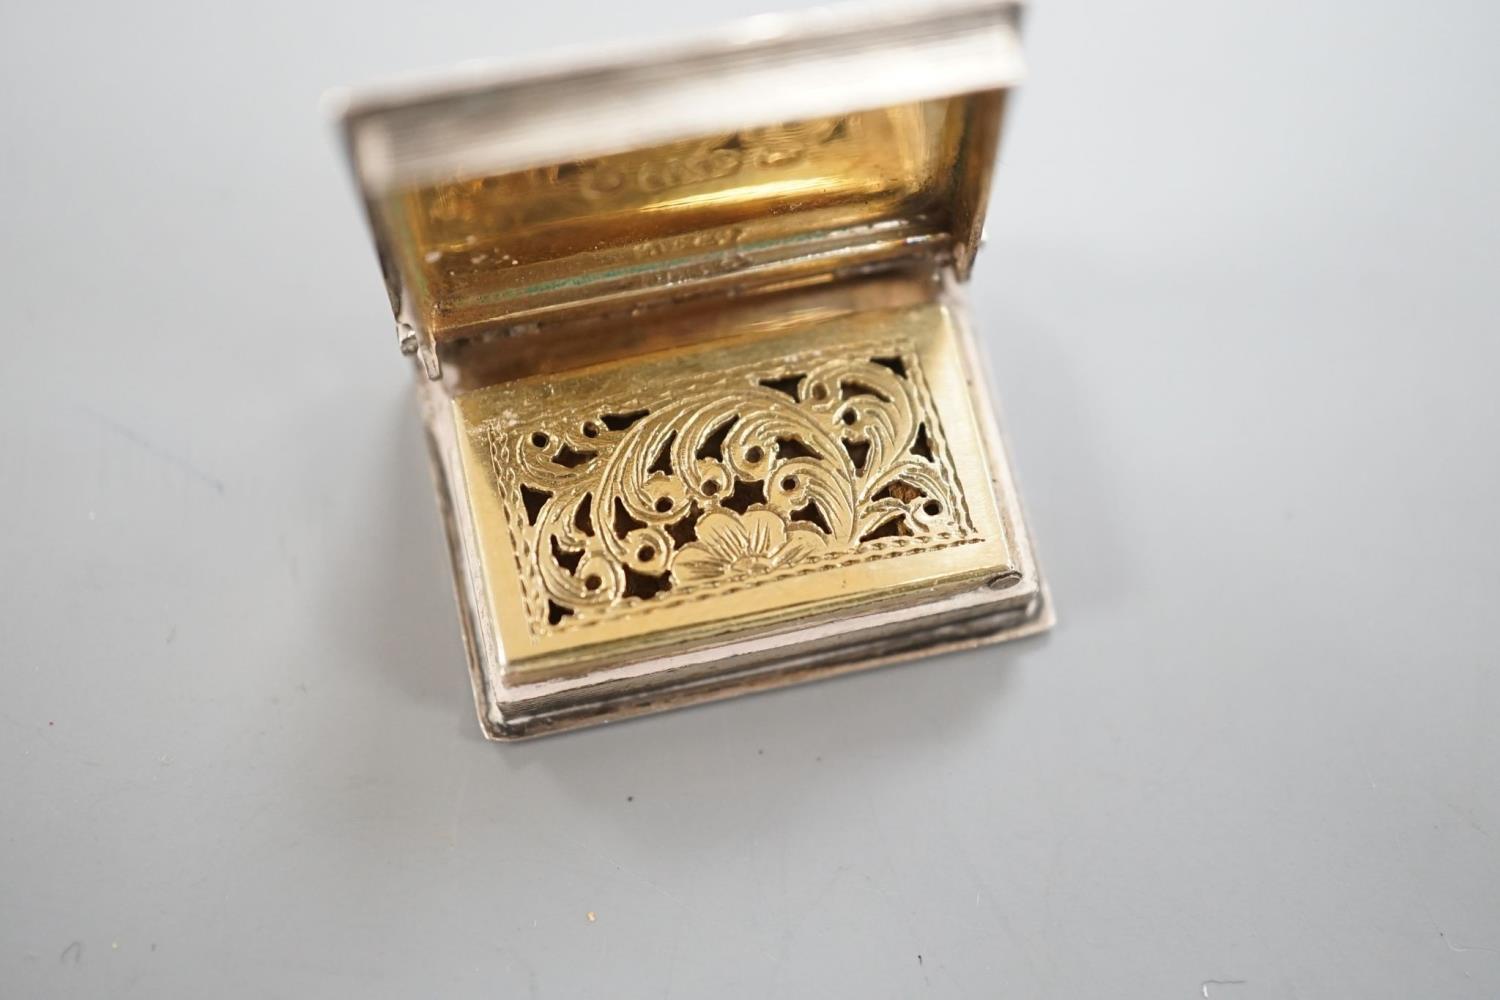 An early Victorian novelty silver vinaigrette, modelled as a book, Taylor & Perry, Birmingham, 1838, - Image 5 of 7